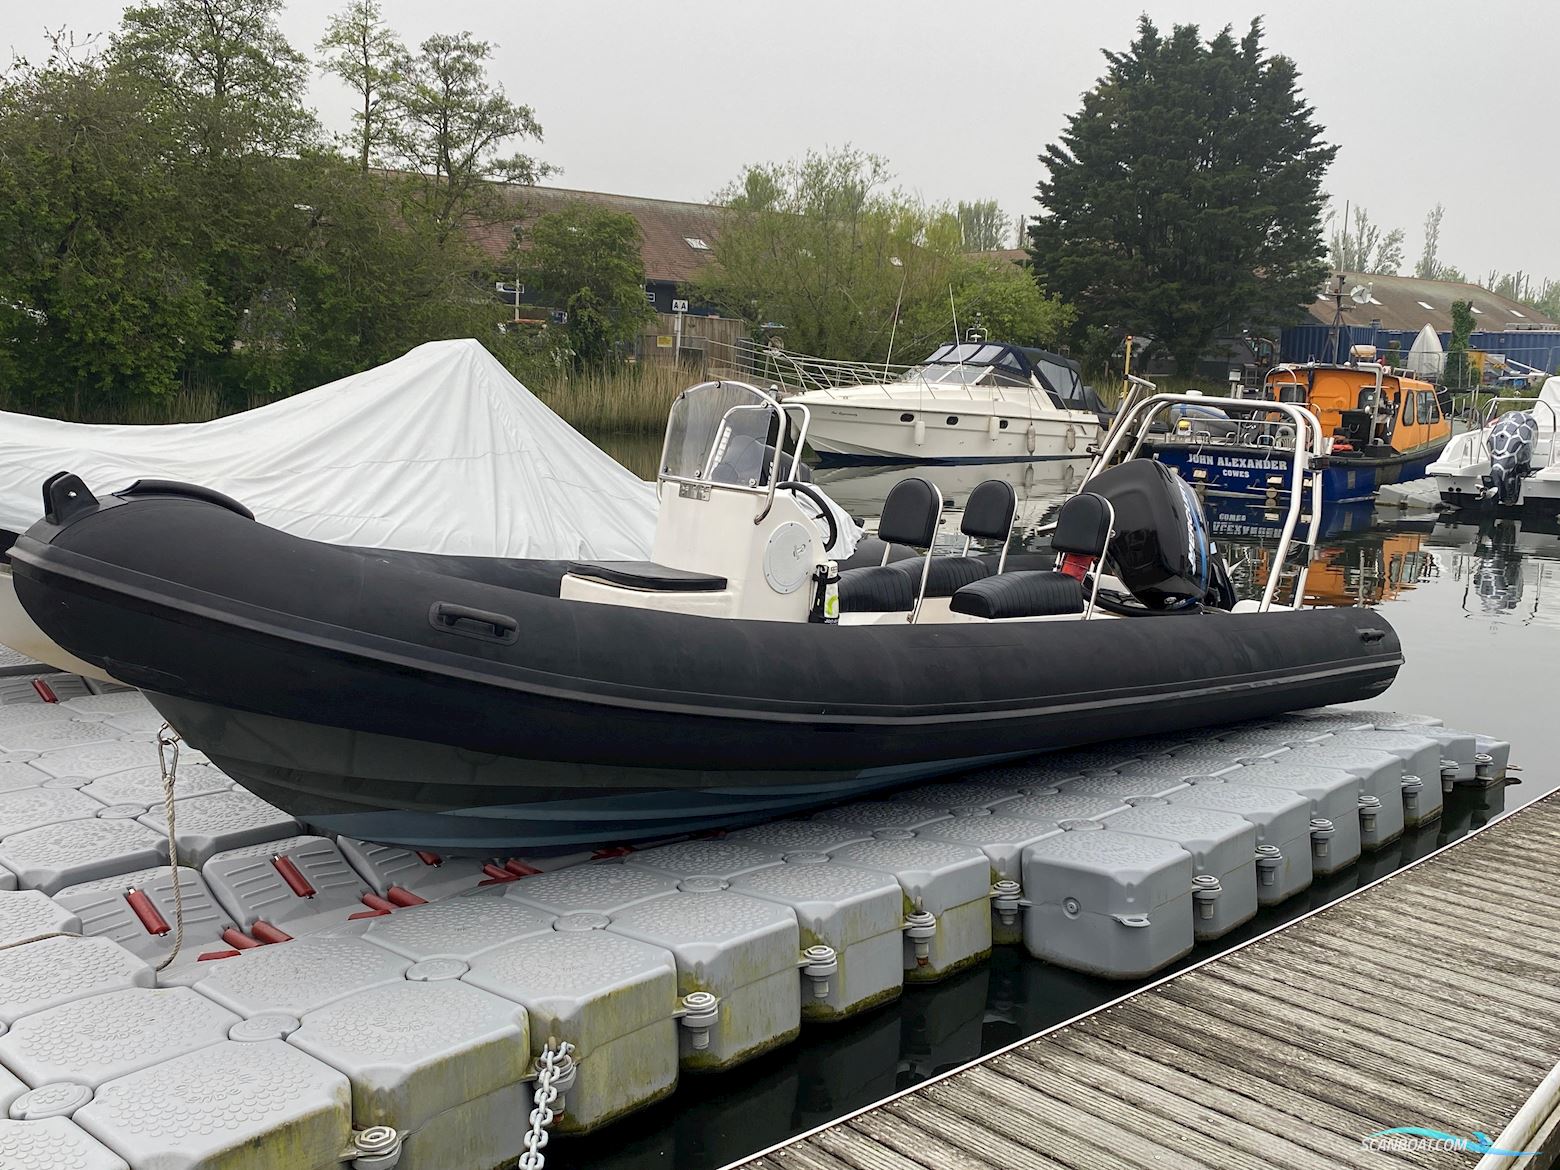 XS Ribs 700 Deluxe Inflatable / Rib 2008, with Mercury engine, United Kingdom